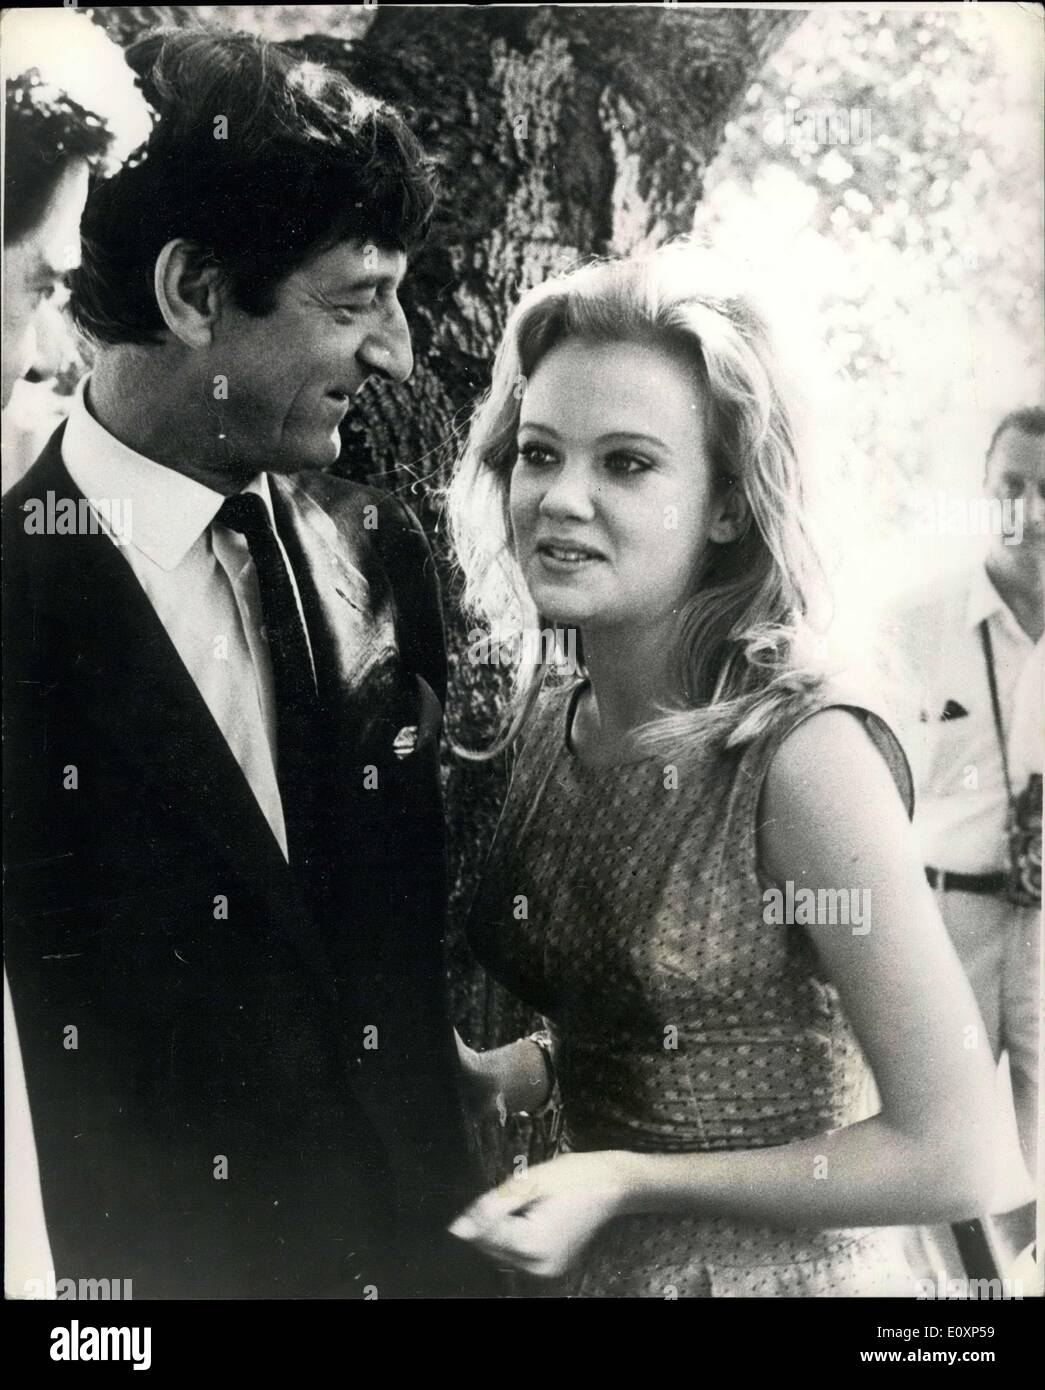 Jul. 19, 1967 - Roy Boulting And Hayley Mills in Hollywood. Photo shows Pictured together at a Hollywood studio recently, are 54-year old film director, Roy Boulting, and the girl he hopes to marry 21-year old British film star. Hayley Mills. Roy and Hayley made an American publicity tour promoting the film ''The Family Way'', which Roy directed and in which Hayley played her first ''adult'' role. Stock Photo